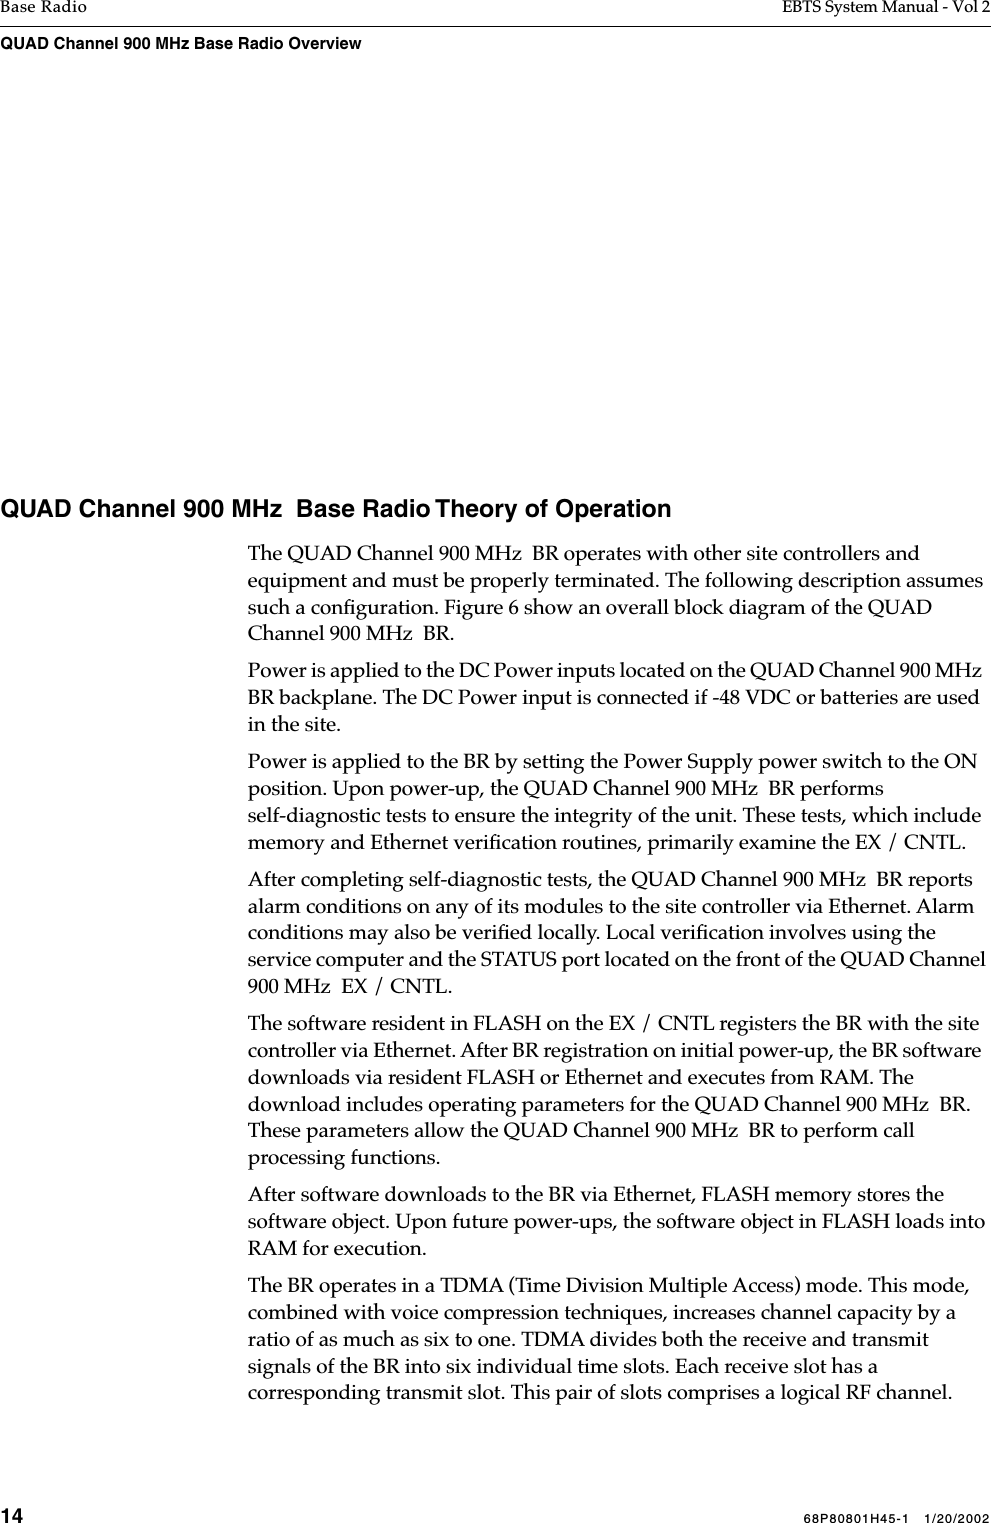 14 68P80801H45-1   1/20/2002Base Radio EBTS System Manual - Vol 2QUAD Channel 900 MHz Base Radio Overview   QUAD Channel 900 MHz  Base Radio Theory of OperationThe QUAD Channel 900 MHz  BR operates with other site controllers and equipment and must be properly terminated. The following description assumes such a conﬁguration. Figure 6 show an overall block diagram of the QUAD Channel 900 MHz  BR.Power is applied to the DC Power inputs located on the QUAD Channel 900 MHz  BR backplane. The DC Power input is connected if -48 VDC or batteries are used in the site.Power is applied to the BR by setting the Power Supply power switch to the ON position. Upon power-up, the QUAD Channel 900 MHz  BR performs self-diagnostic tests to ensure the integrity of the unit. These tests, which include memory and Ethernet veriﬁcation routines, primarily examine the EX / CNTL. After completing self-diagnostic tests, the QUAD Channel 900 MHz  BR reports alarm conditions on any of its modules to the site controller via Ethernet. Alarm conditions may also be veriﬁed locally. Local veriﬁcation involves using the service computer and the STATUS port located on the front of the QUAD Channel 900 MHz  EX / CNTL.The software resident in FLASH on the EX / CNTL registers the BR with the site controller via Ethernet. After BR registration on initial power-up, the BR software  downloads via resident FLASH or Ethernet and executes from RAM. The download includes operating parameters for the QUAD Channel 900 MHz  BR. These parameters allow the QUAD Channel 900 MHz  BR to perform call processing functions. After software downloads to the BR via Ethernet, FLASH memory stores the software object. Upon future power-ups, the software object in FLASH loads into RAM for execution.The BR operates in a TDMA (Time Division Multiple Access) mode. This mode, combined with voice compression techniques, increases channel capacity by a ratio of as much as six to one. TDMA divides both the receive and transmit signals of the BR into six individual time slots. Each receive slot has a corresponding transmit slot. This pair of slots comprises a logical RF channel. 